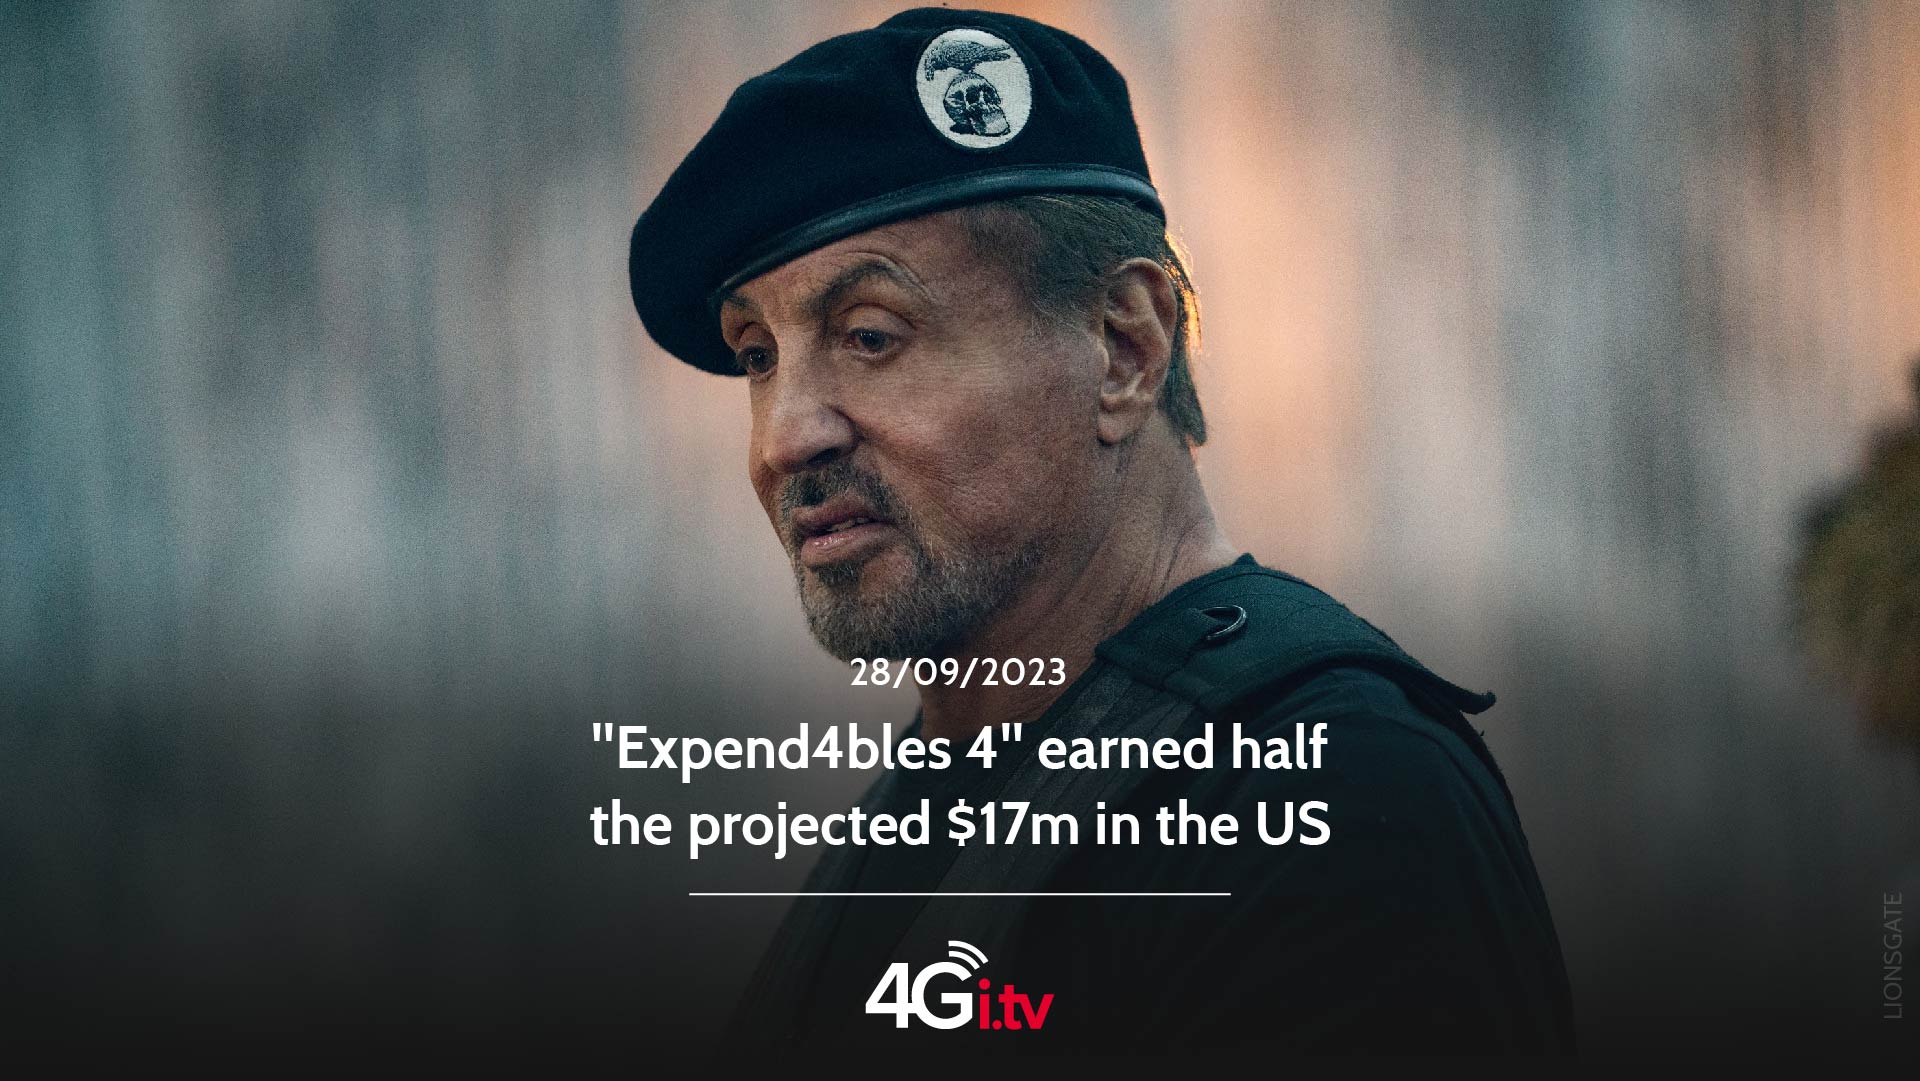 Подробнее о статье “Expend4bles 4” earned half the projected $17m in the US